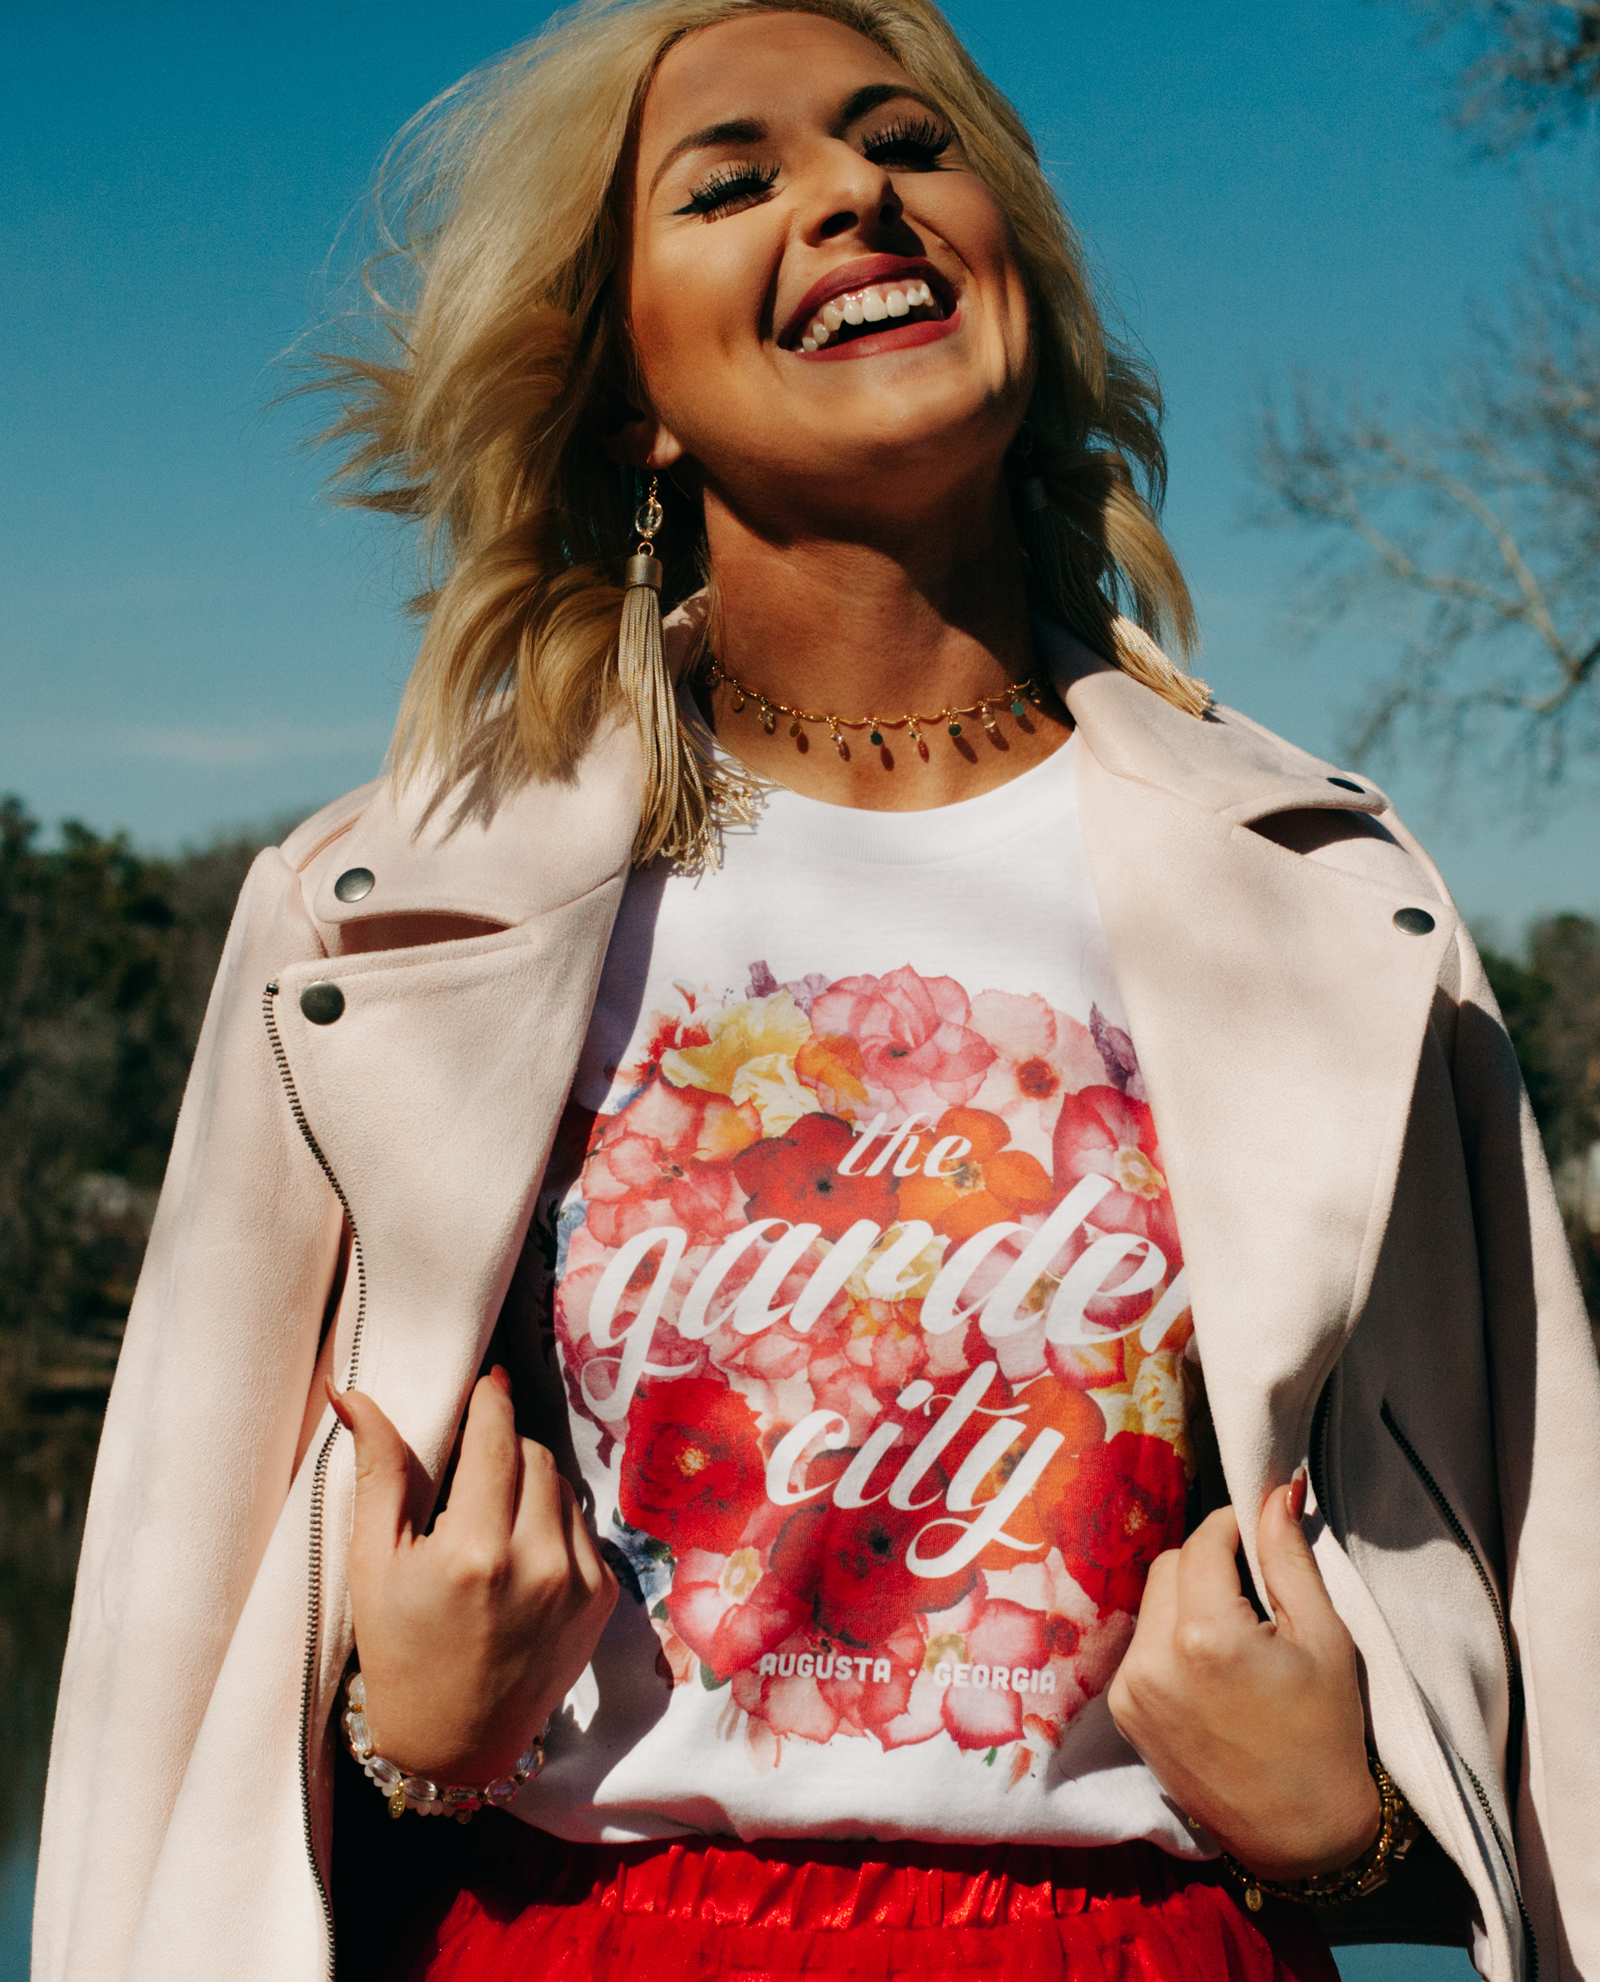 Woman wearing white Floral Garden City shirt with red skirt and jacket